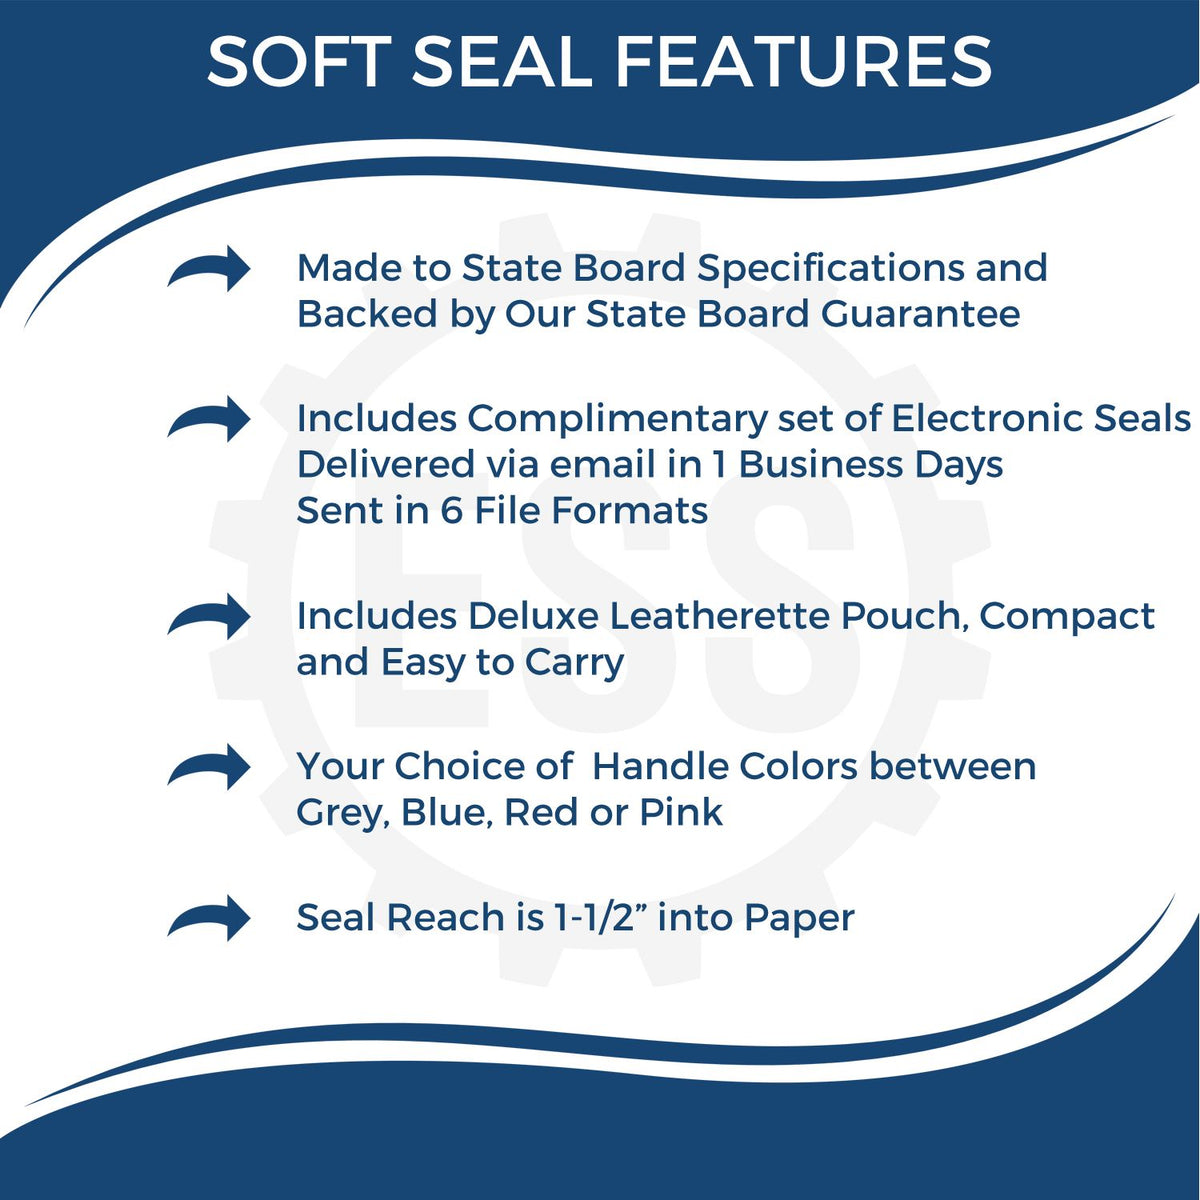 A picture of an infographic highlighting the selling points for the Soft Rhode Island Professional Engineer Seal